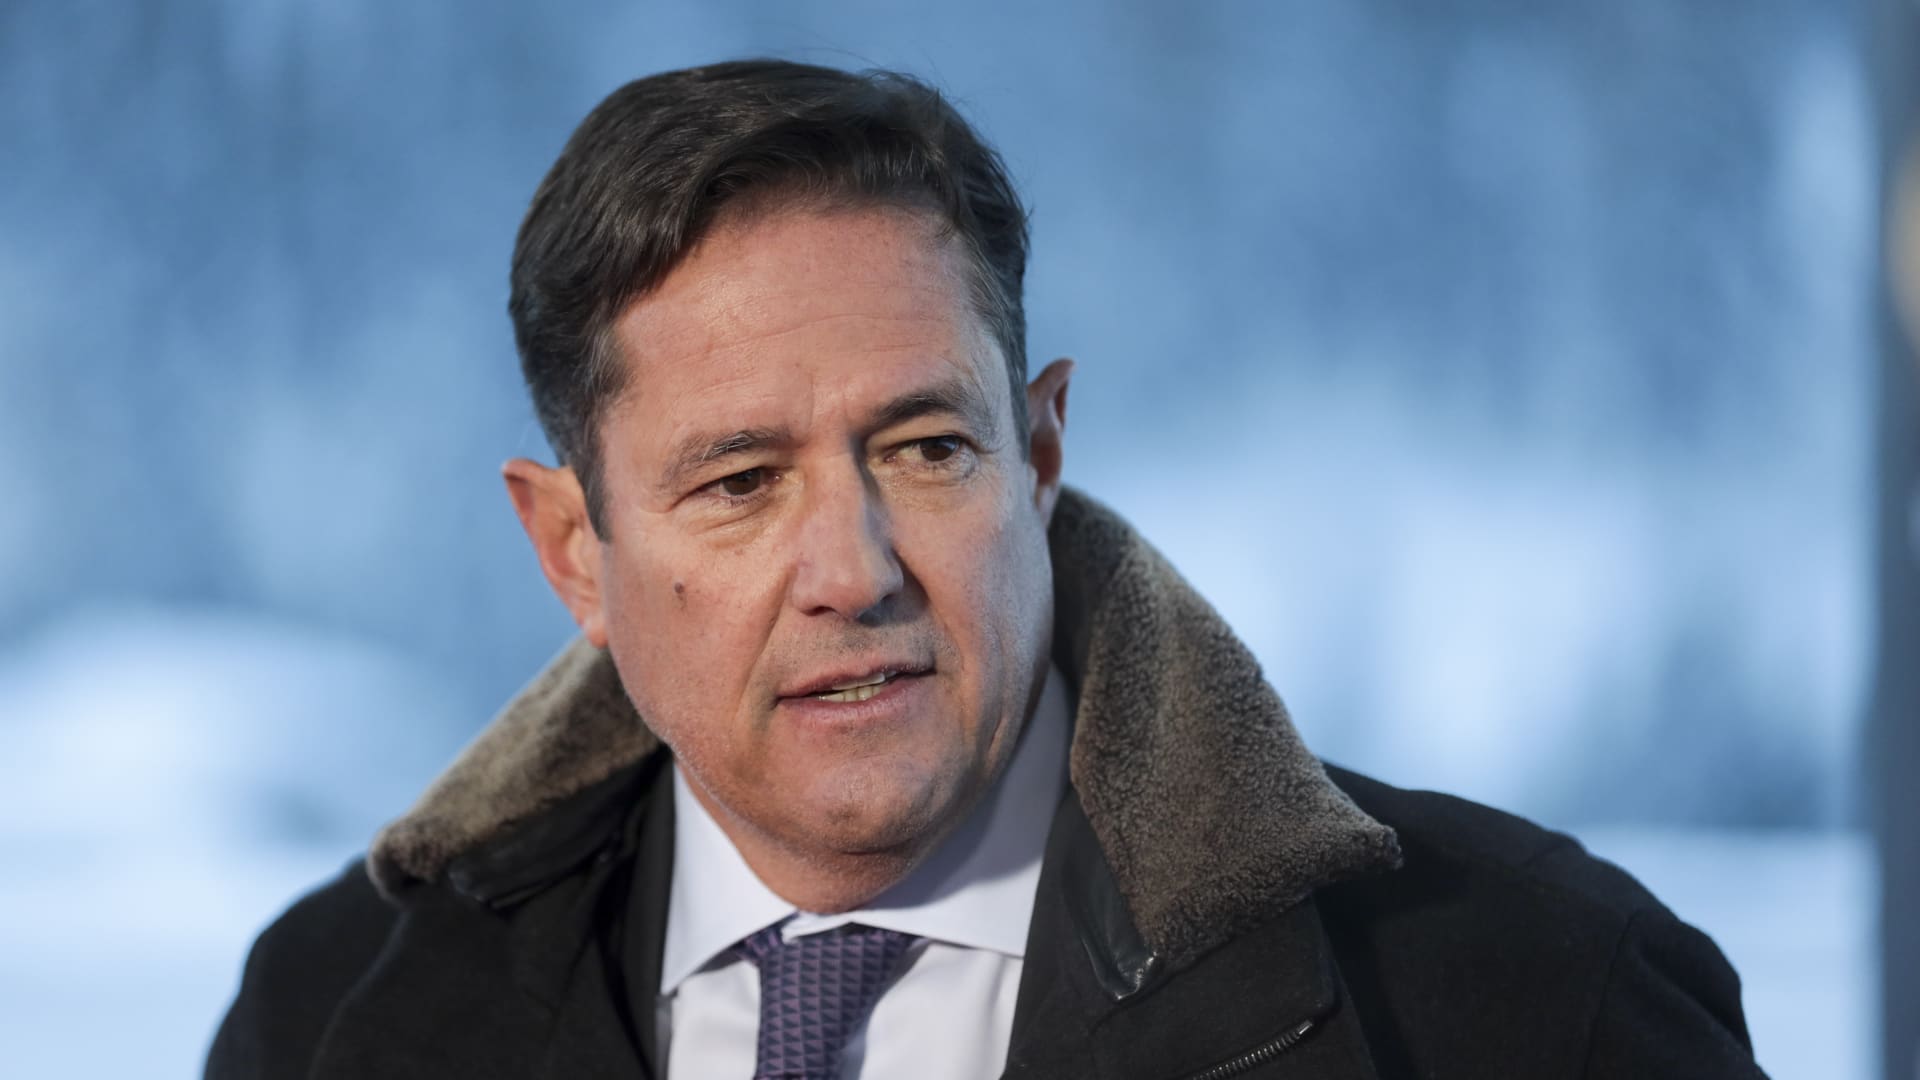 Jes Staley, chief executive officer of Barclays Plc, speaks during a Bloomberg Television interview on day three of the World Economic Forum (WEF) in Davos, Switzerland, on Thursday, Jan. 24, 2019.